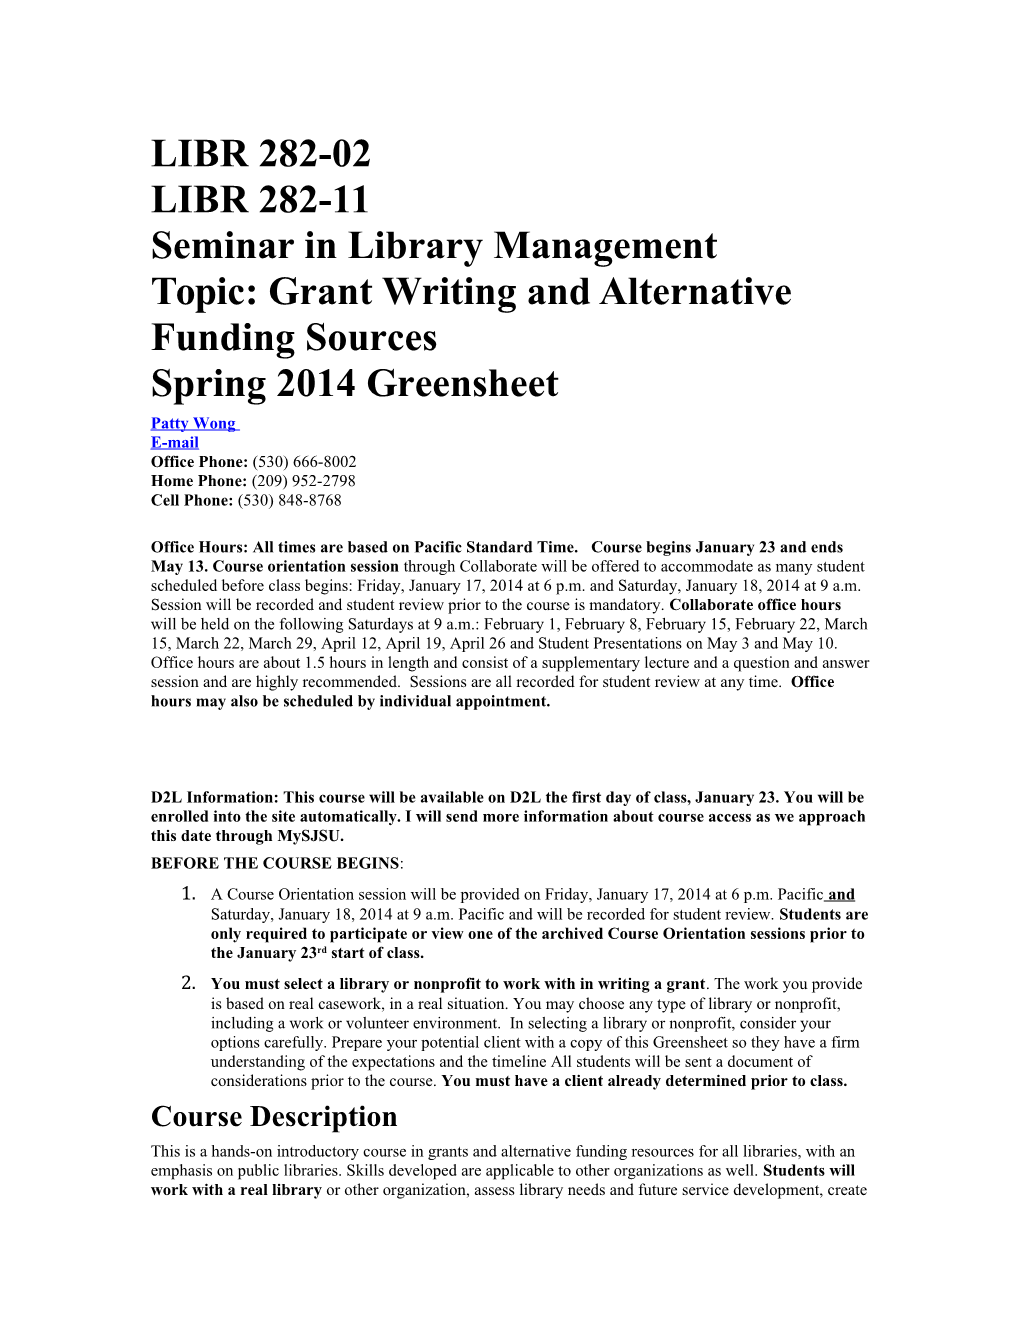 LIBR 282-02 LIBR 282-11 Seminar in Library Management Topic: Grant Writing and Alternative